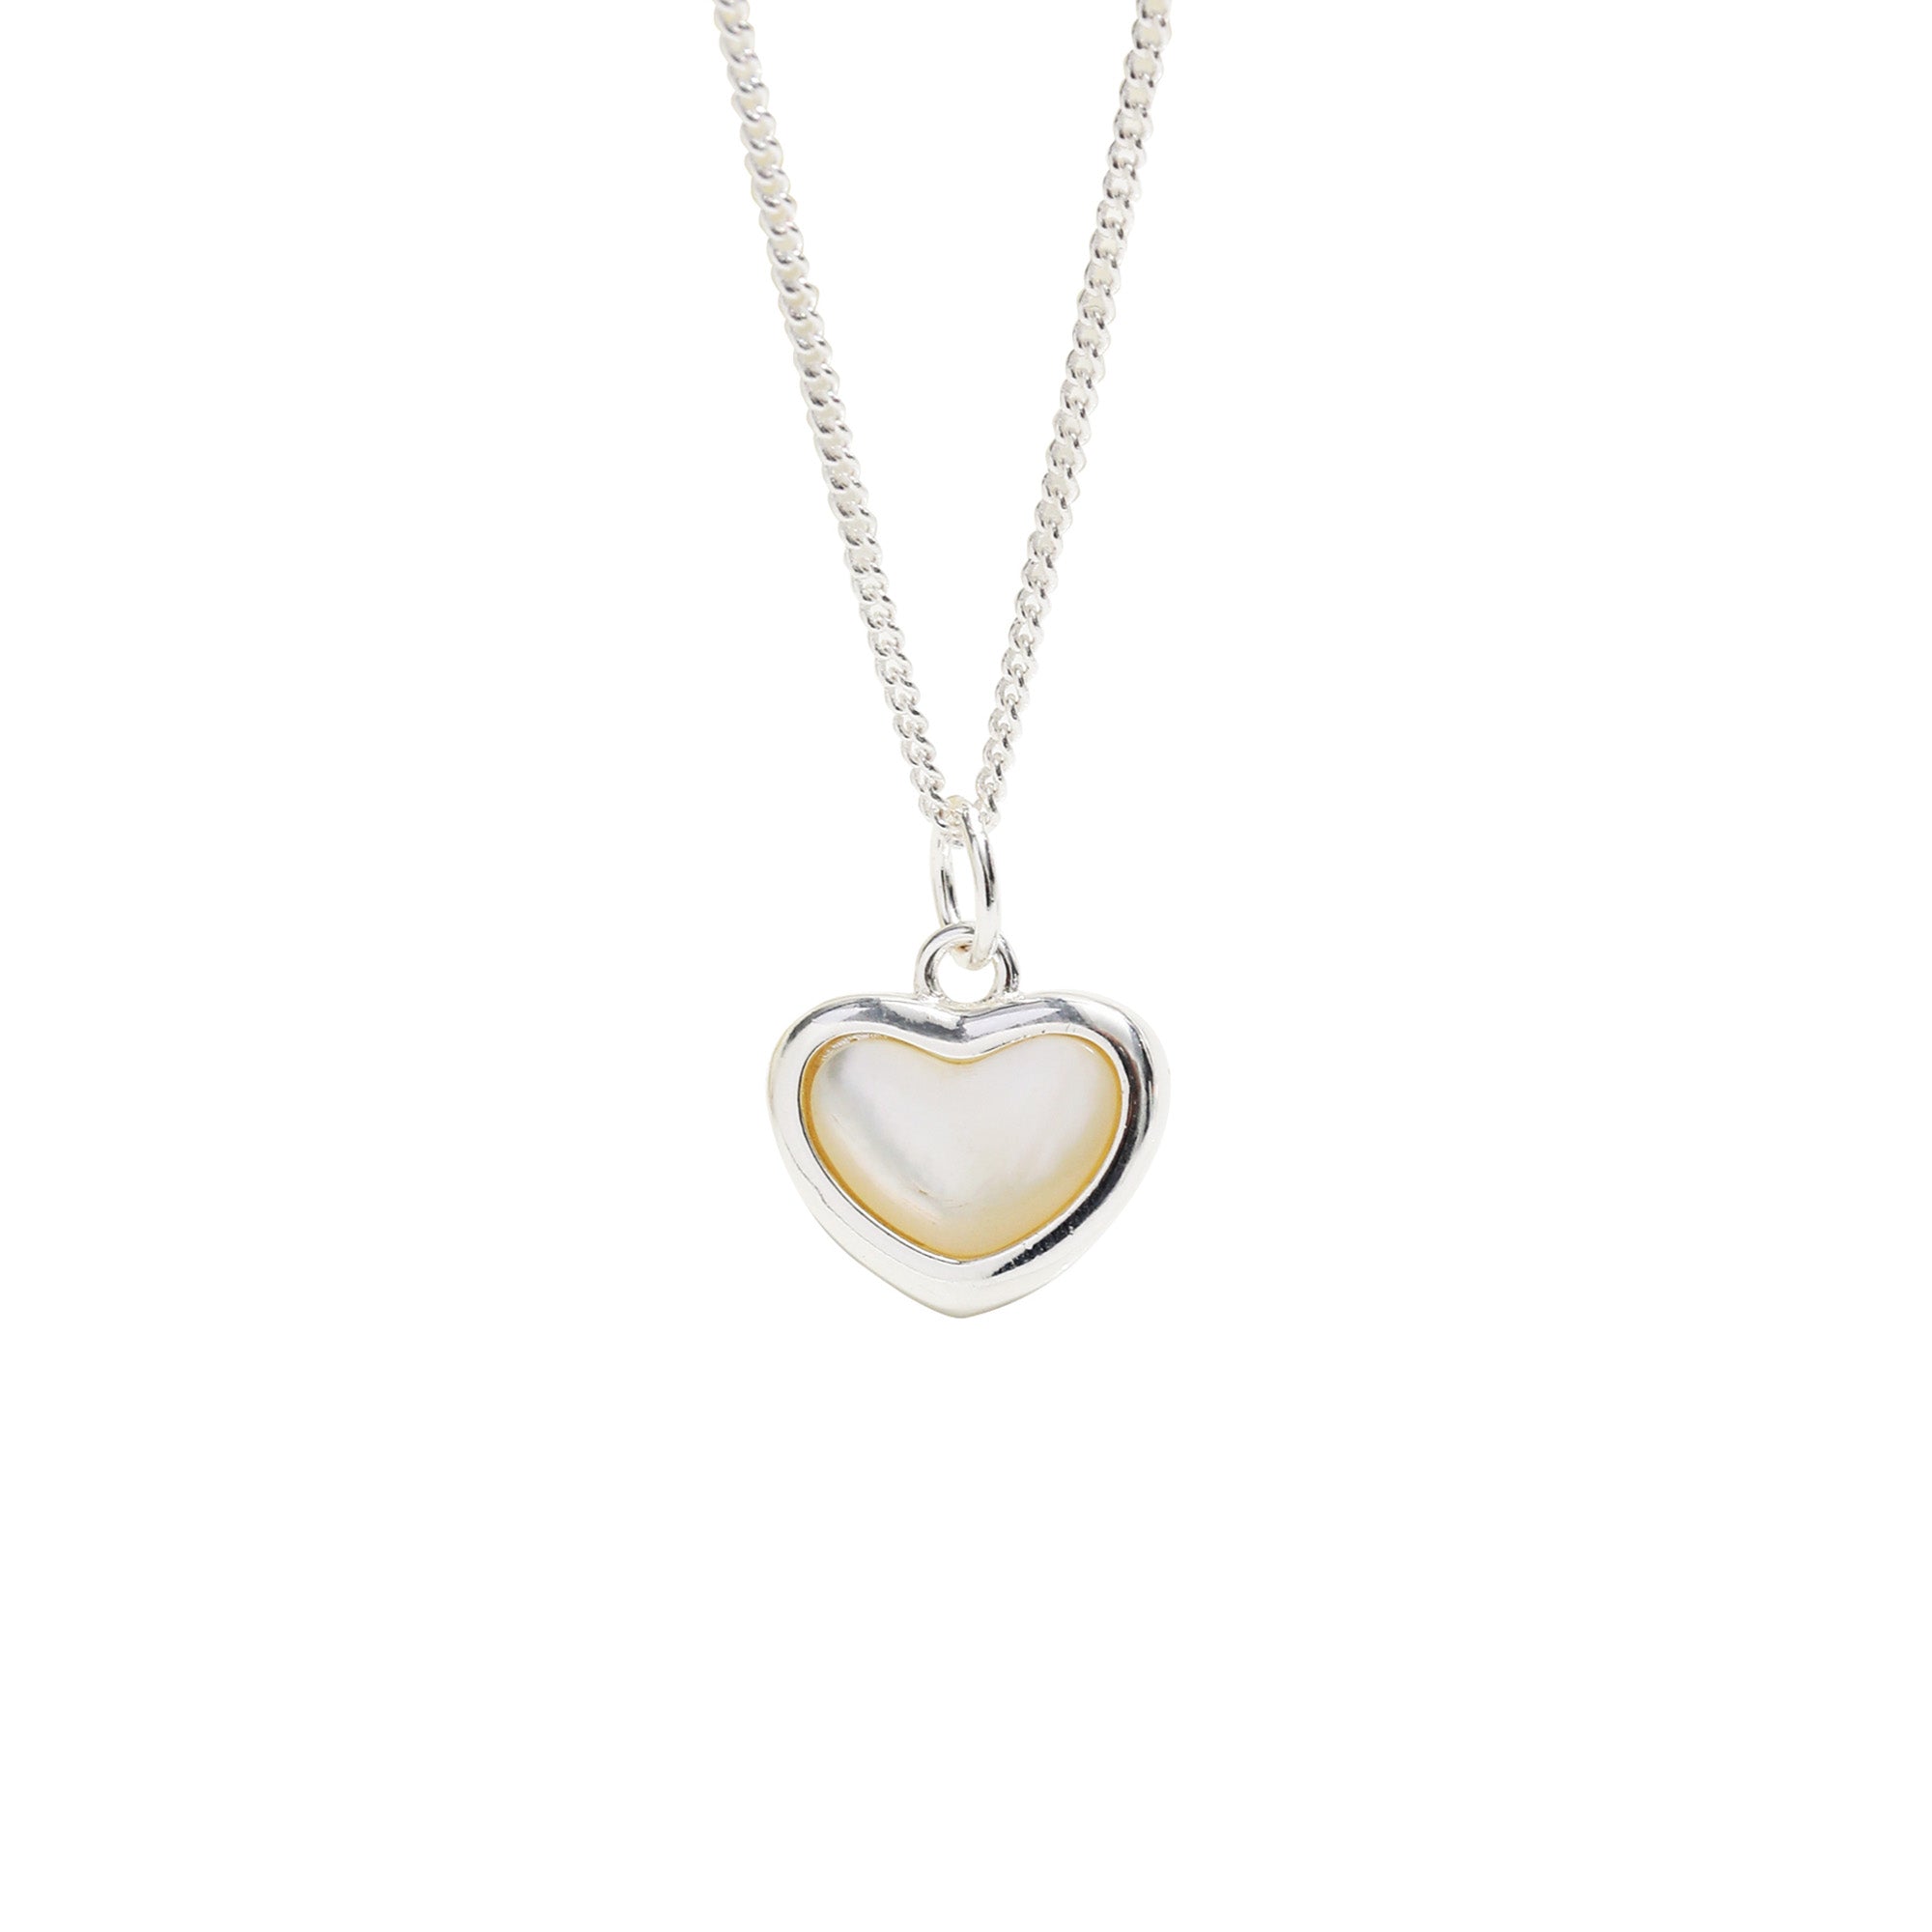 Classicharms Sterling Silver Heart Pendant Necklace